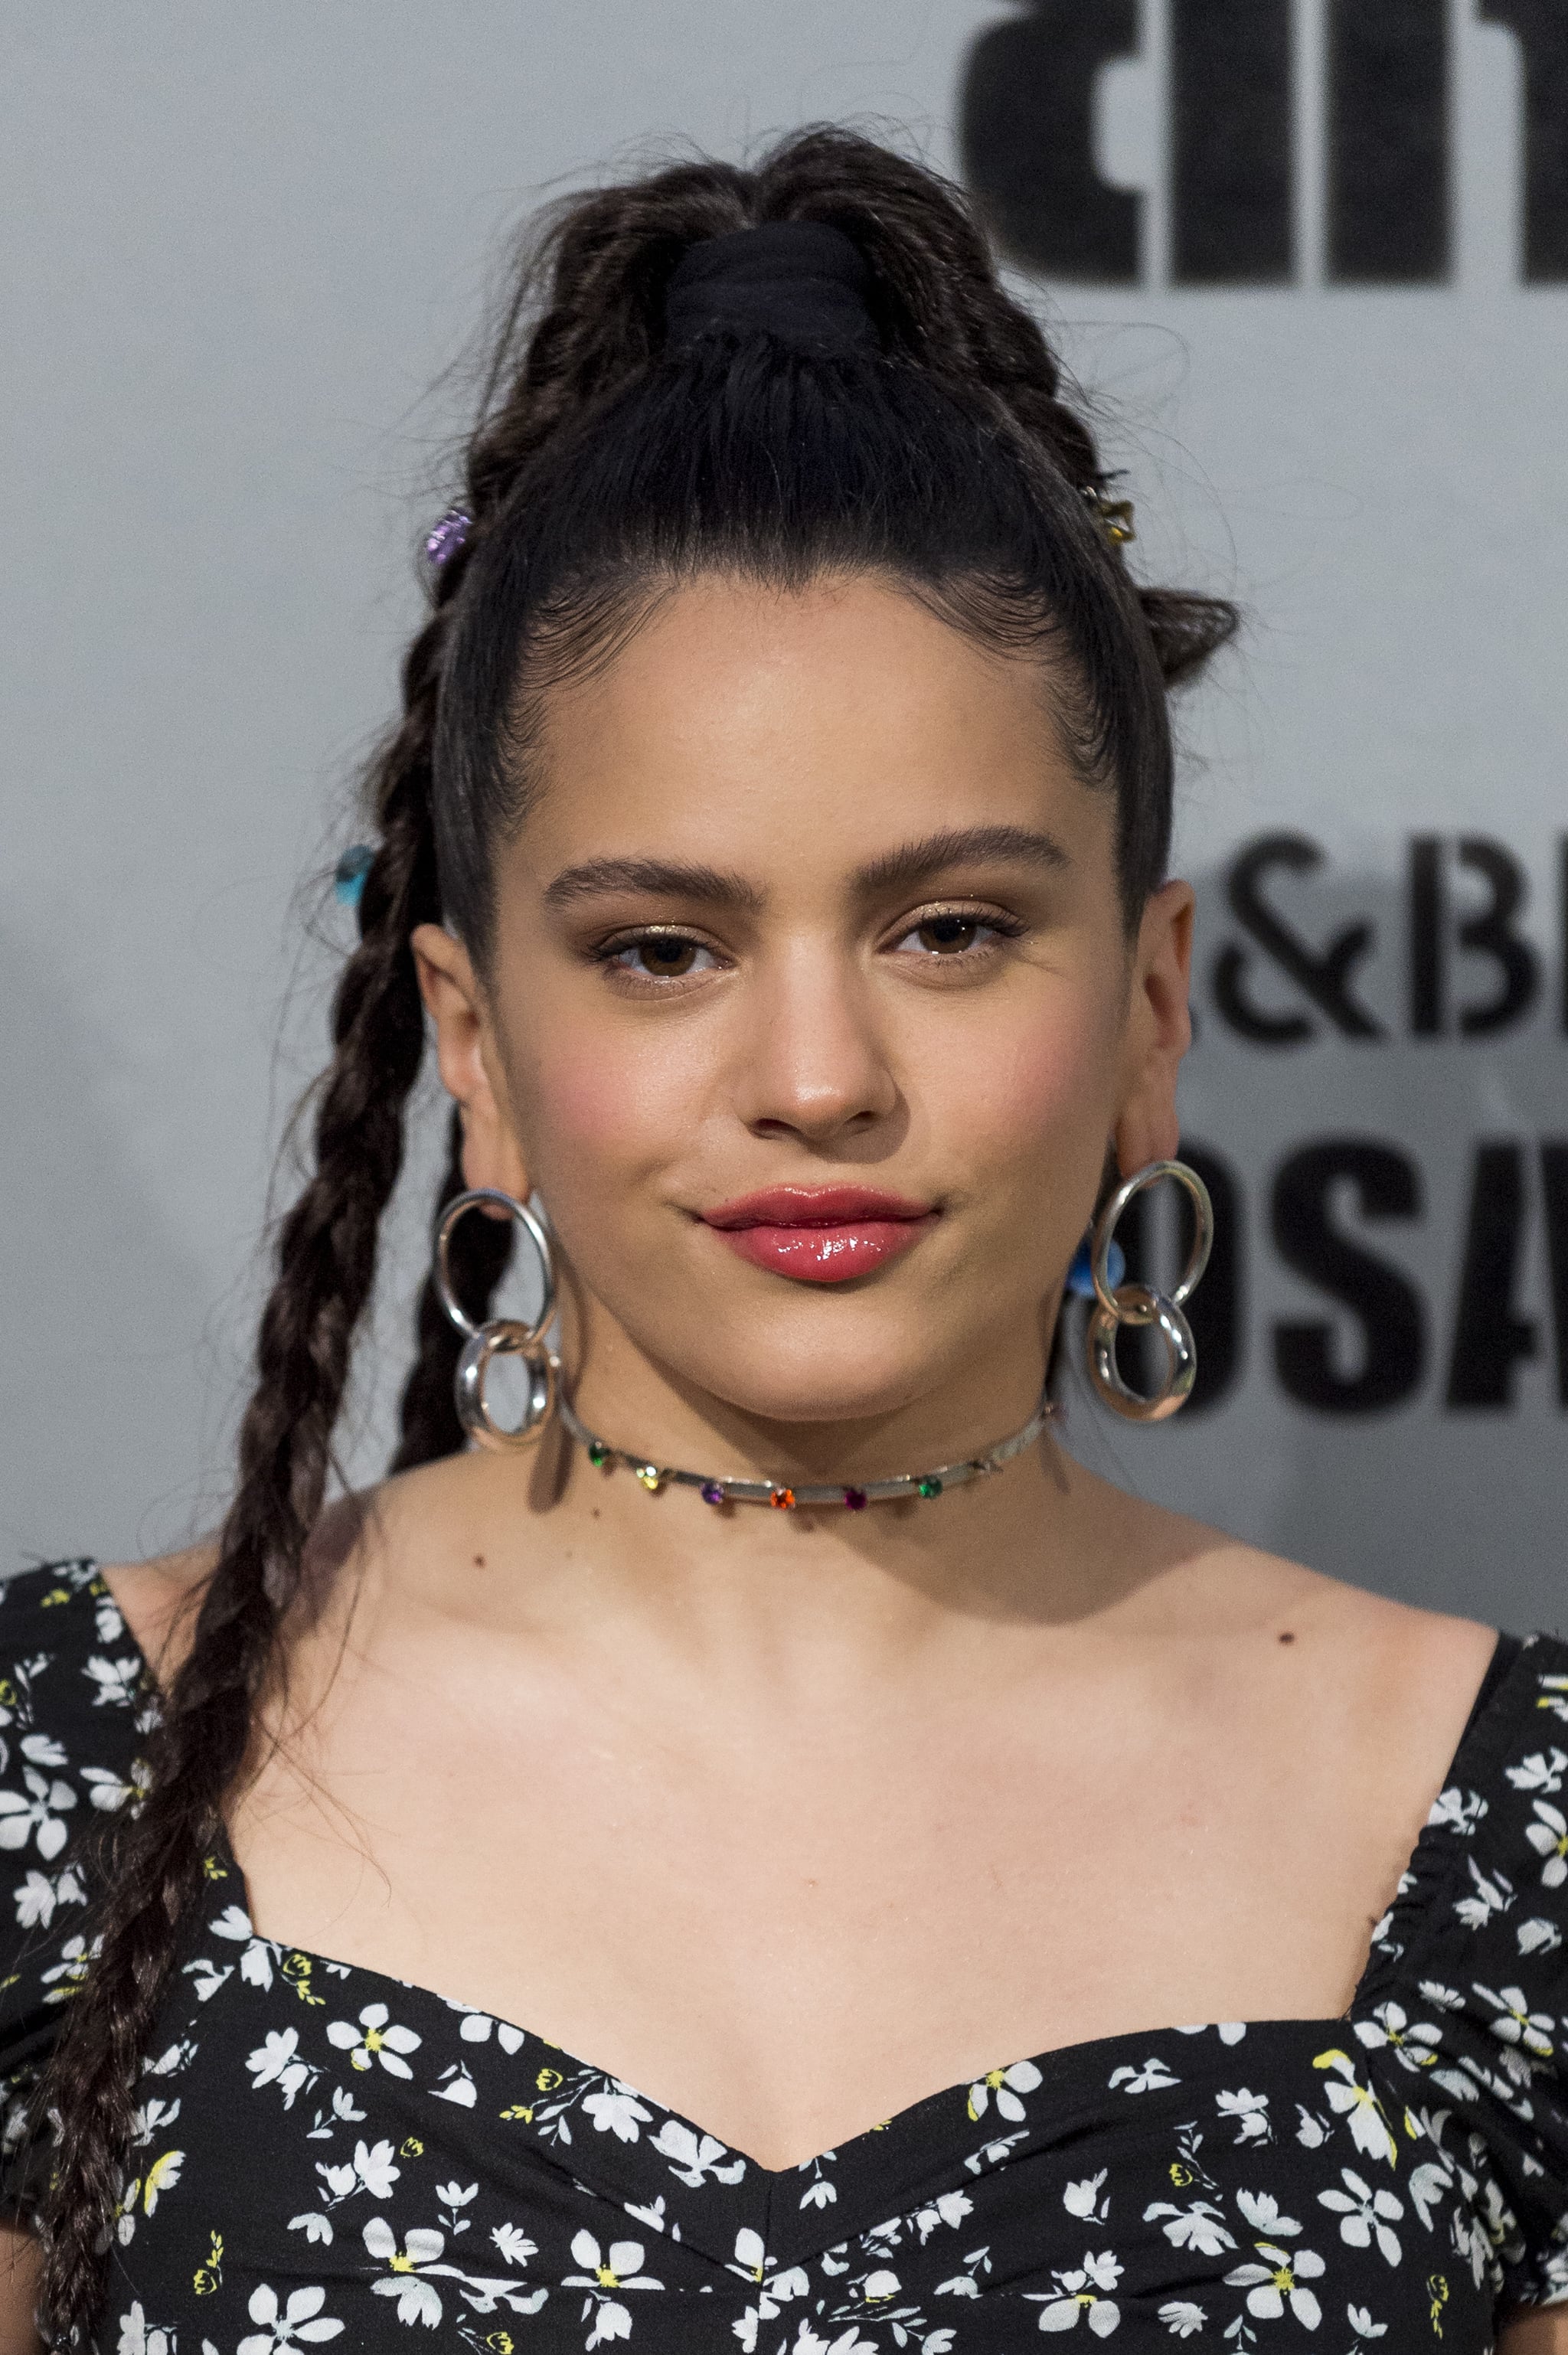 Rosalía in 2019 at Pull & Bear By Rosalia Presentation | Rosalía's Beauty Evolution Over the Years Is Really Just 1 Big Beauty Inspo Page | POPSUGAR Beauty Photo 11